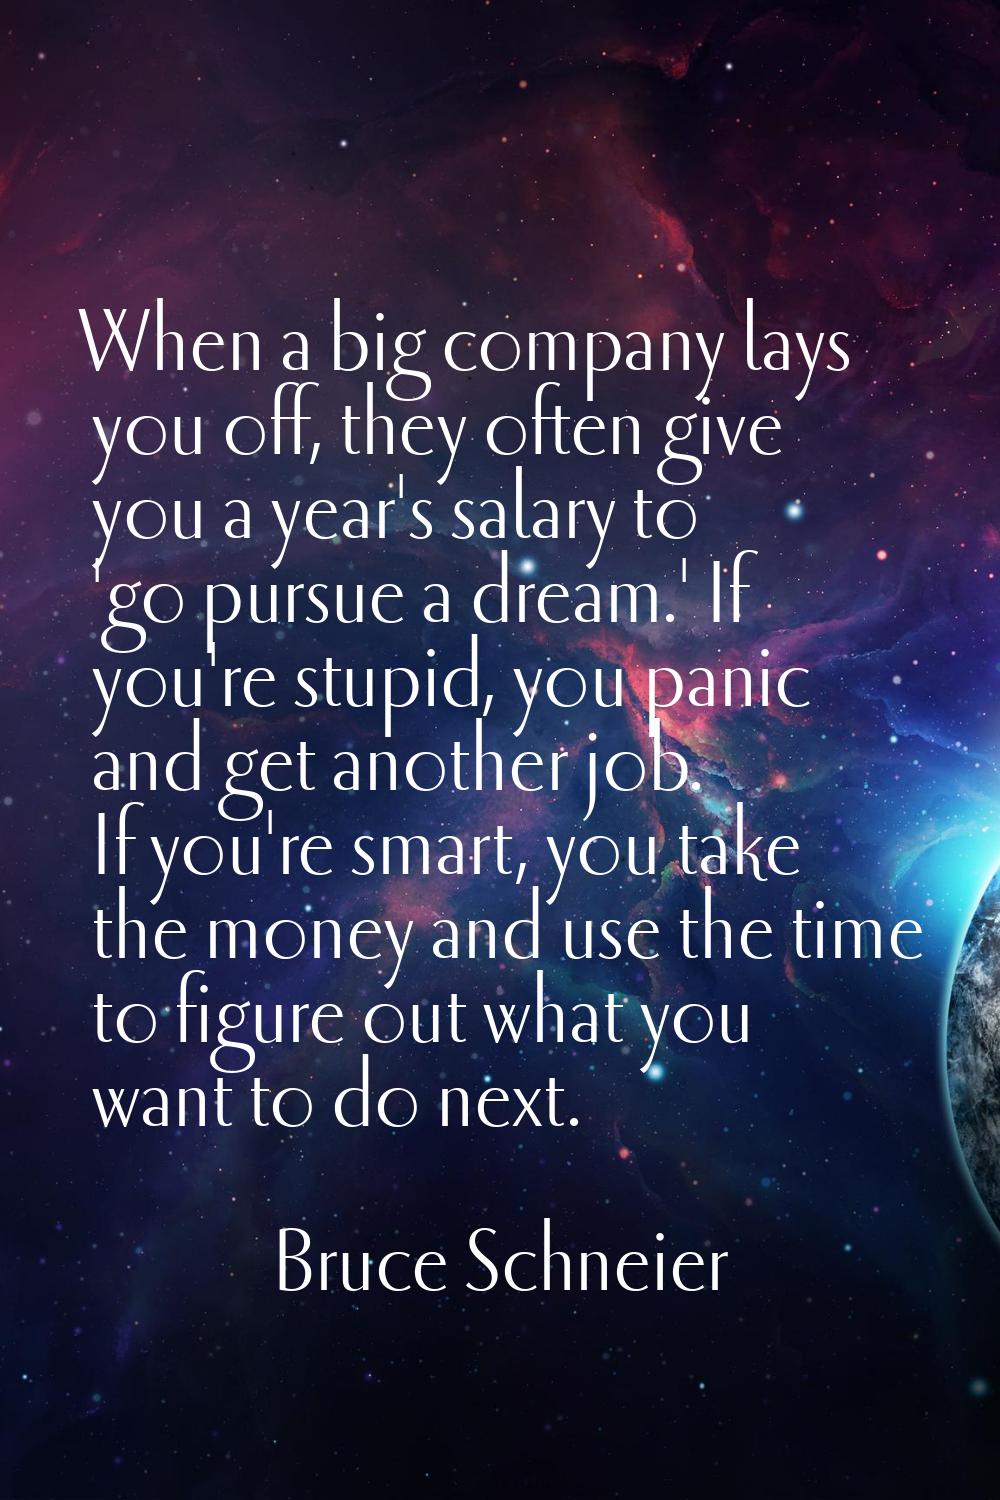 When a big company lays you off, they often give you a year's salary to 'go pursue a dream.' If you